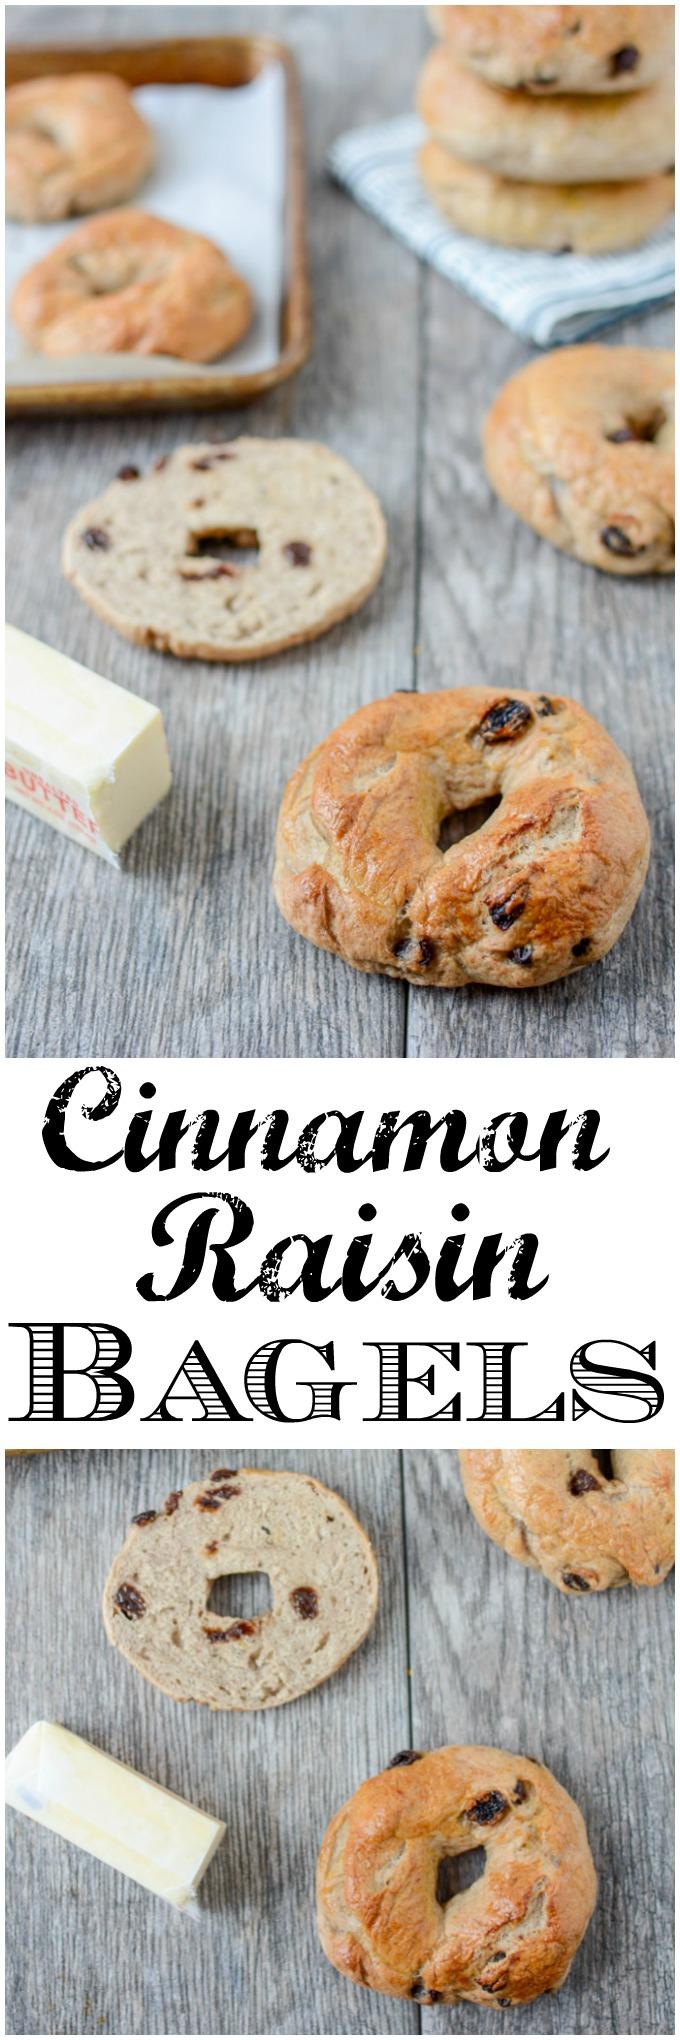 These Cinnamon Raisin Bagels are easy to make at home and taste way better than store-bought! Perfect with peanut butter for an afternoon snack!